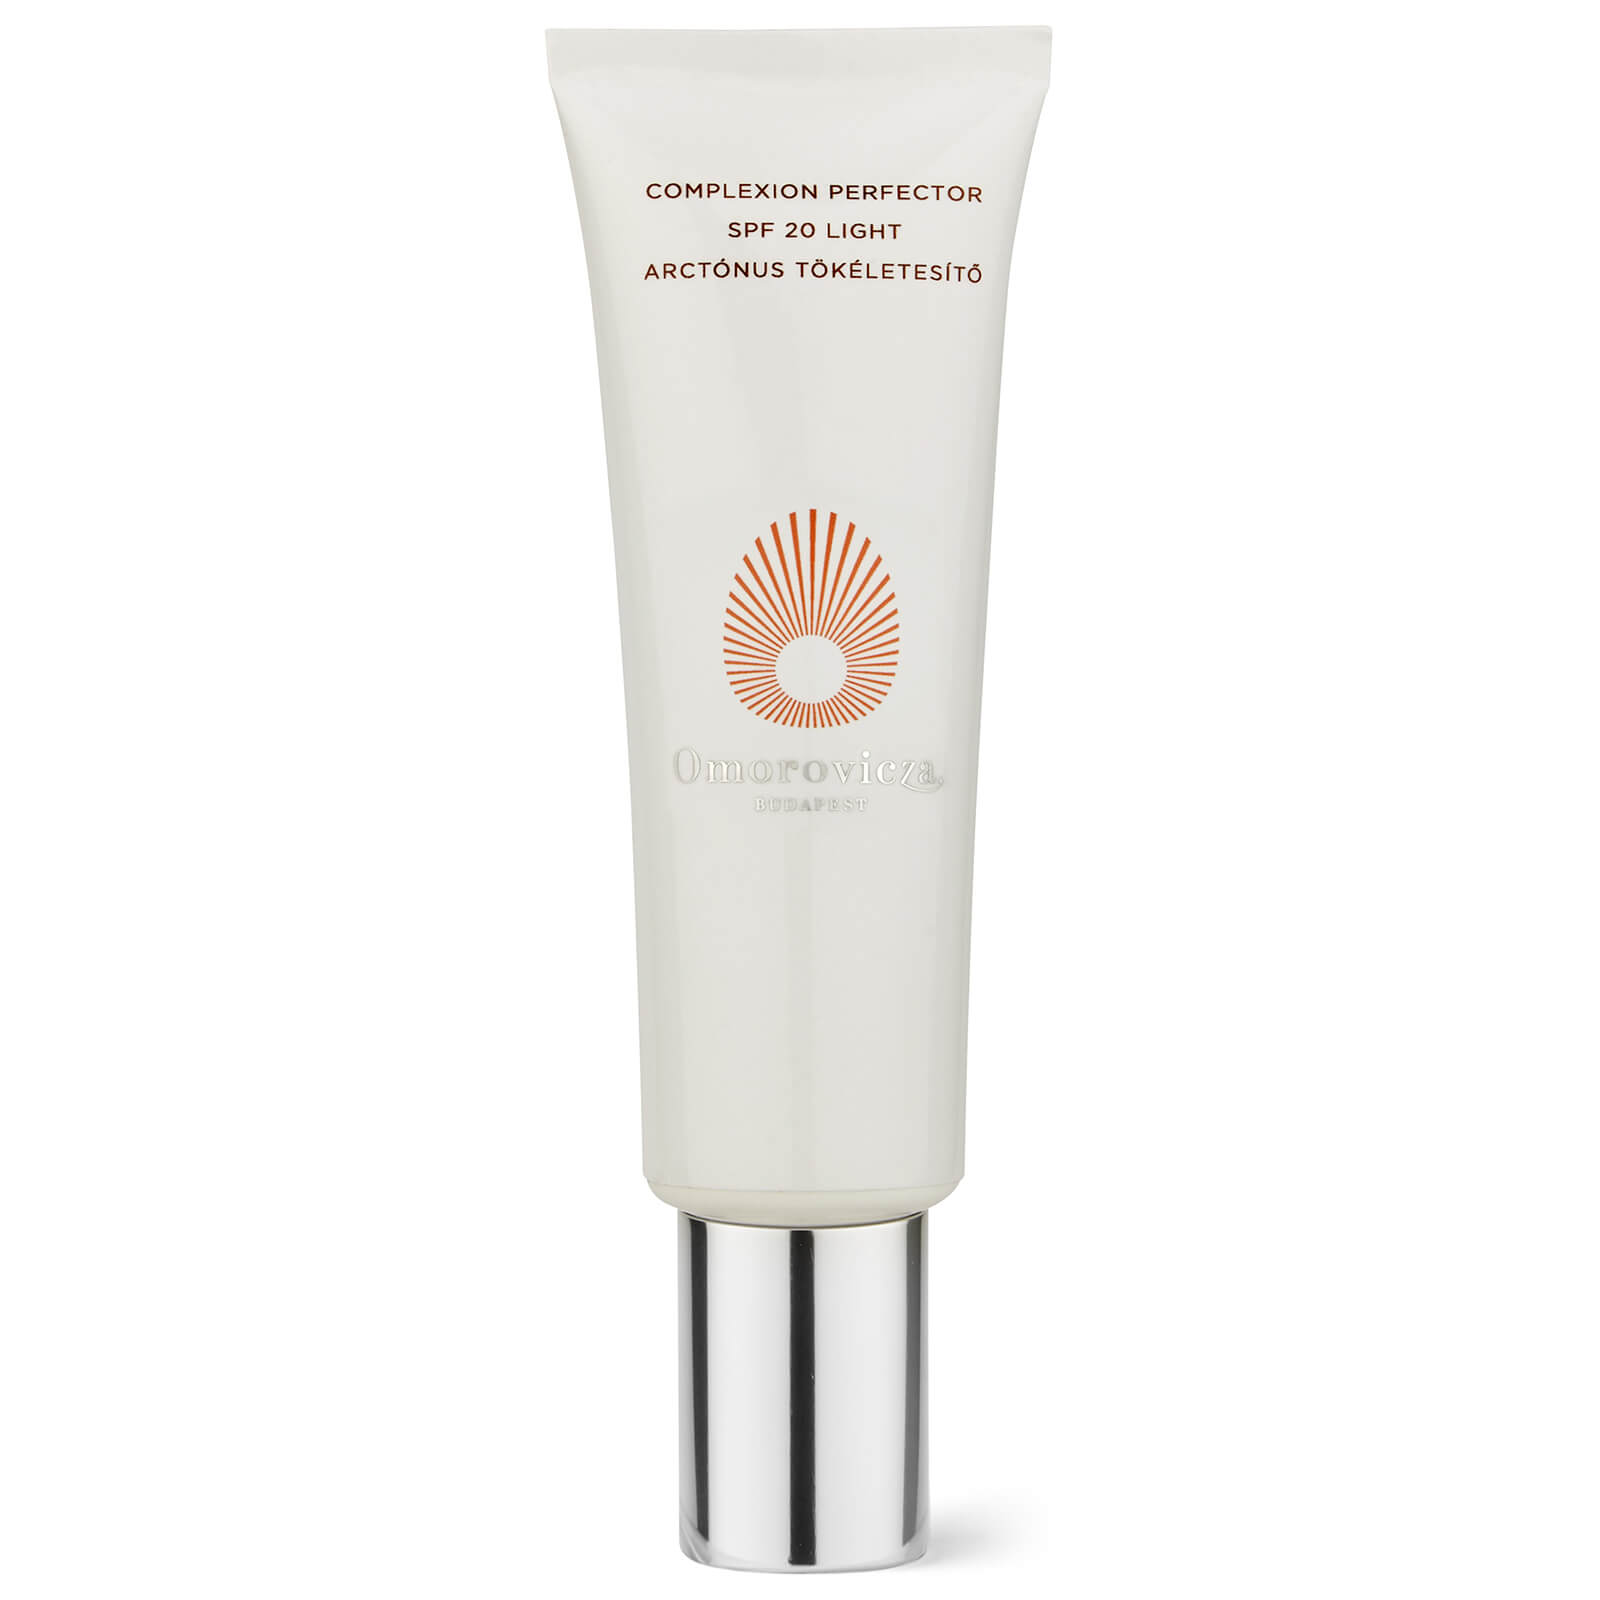 Omorovicza Complexion Perfector SPF20 Lotion 50ml (Various Shades) - Light